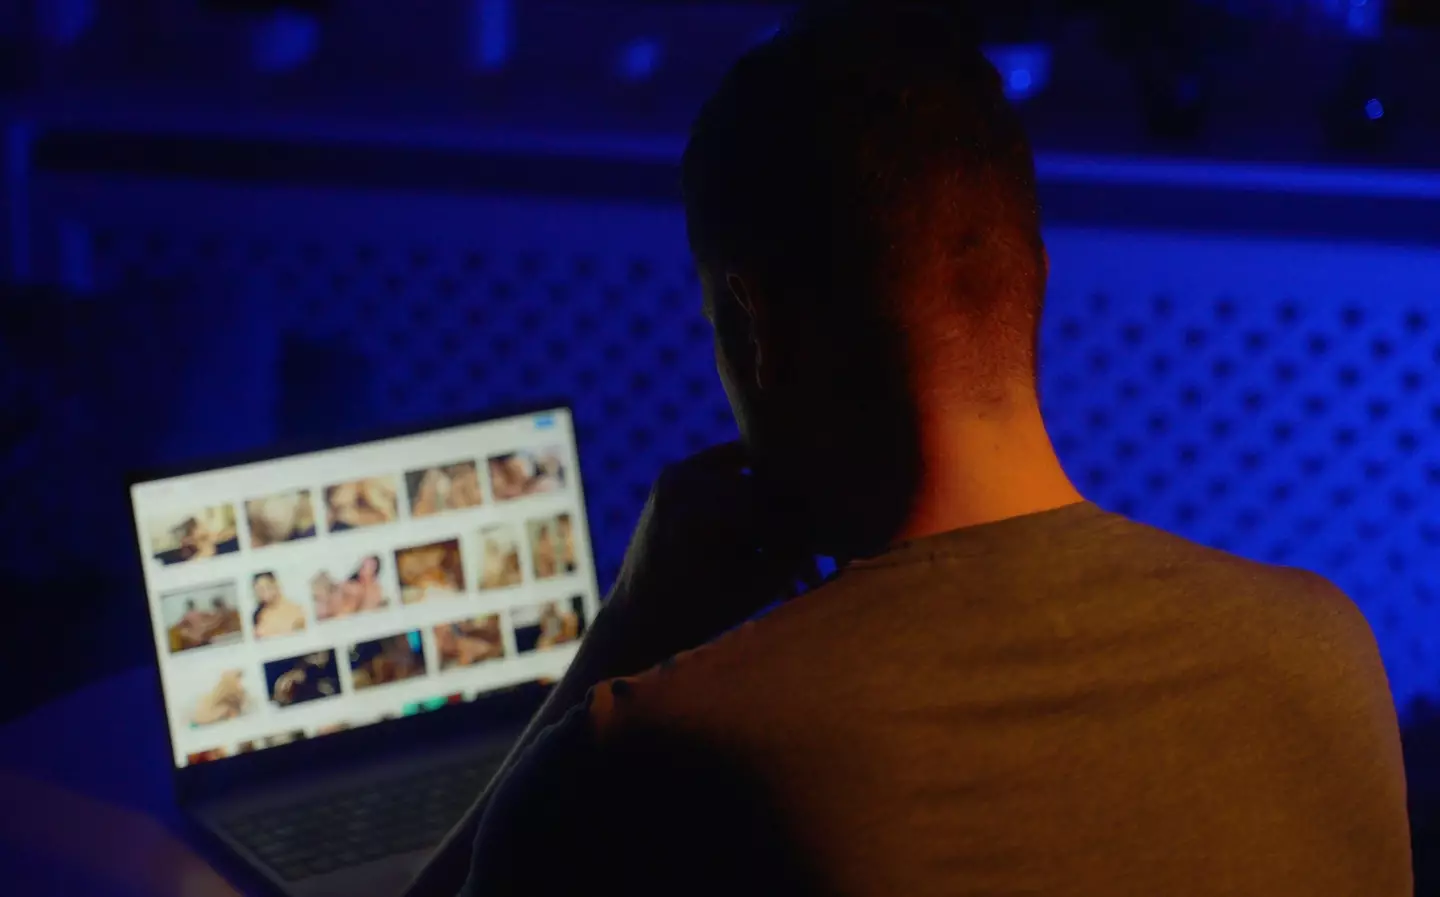 Sean Clifford says teens could be seeing thousands of pornographic images before they're 18.